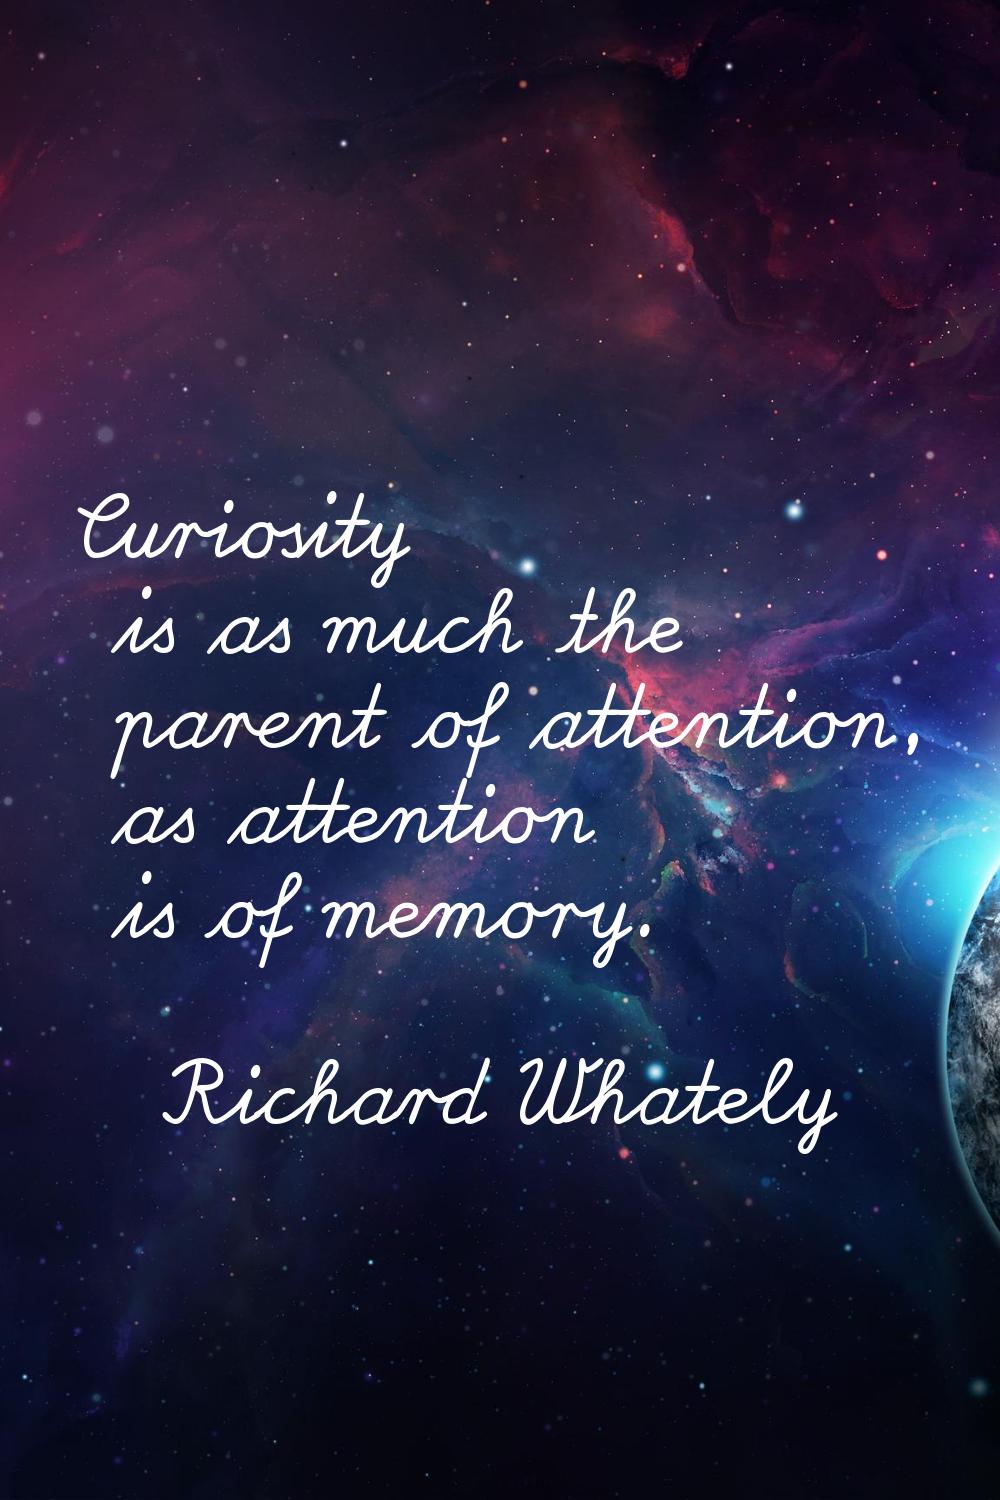 Curiosity is as much the parent of attention, as attention is of memory.